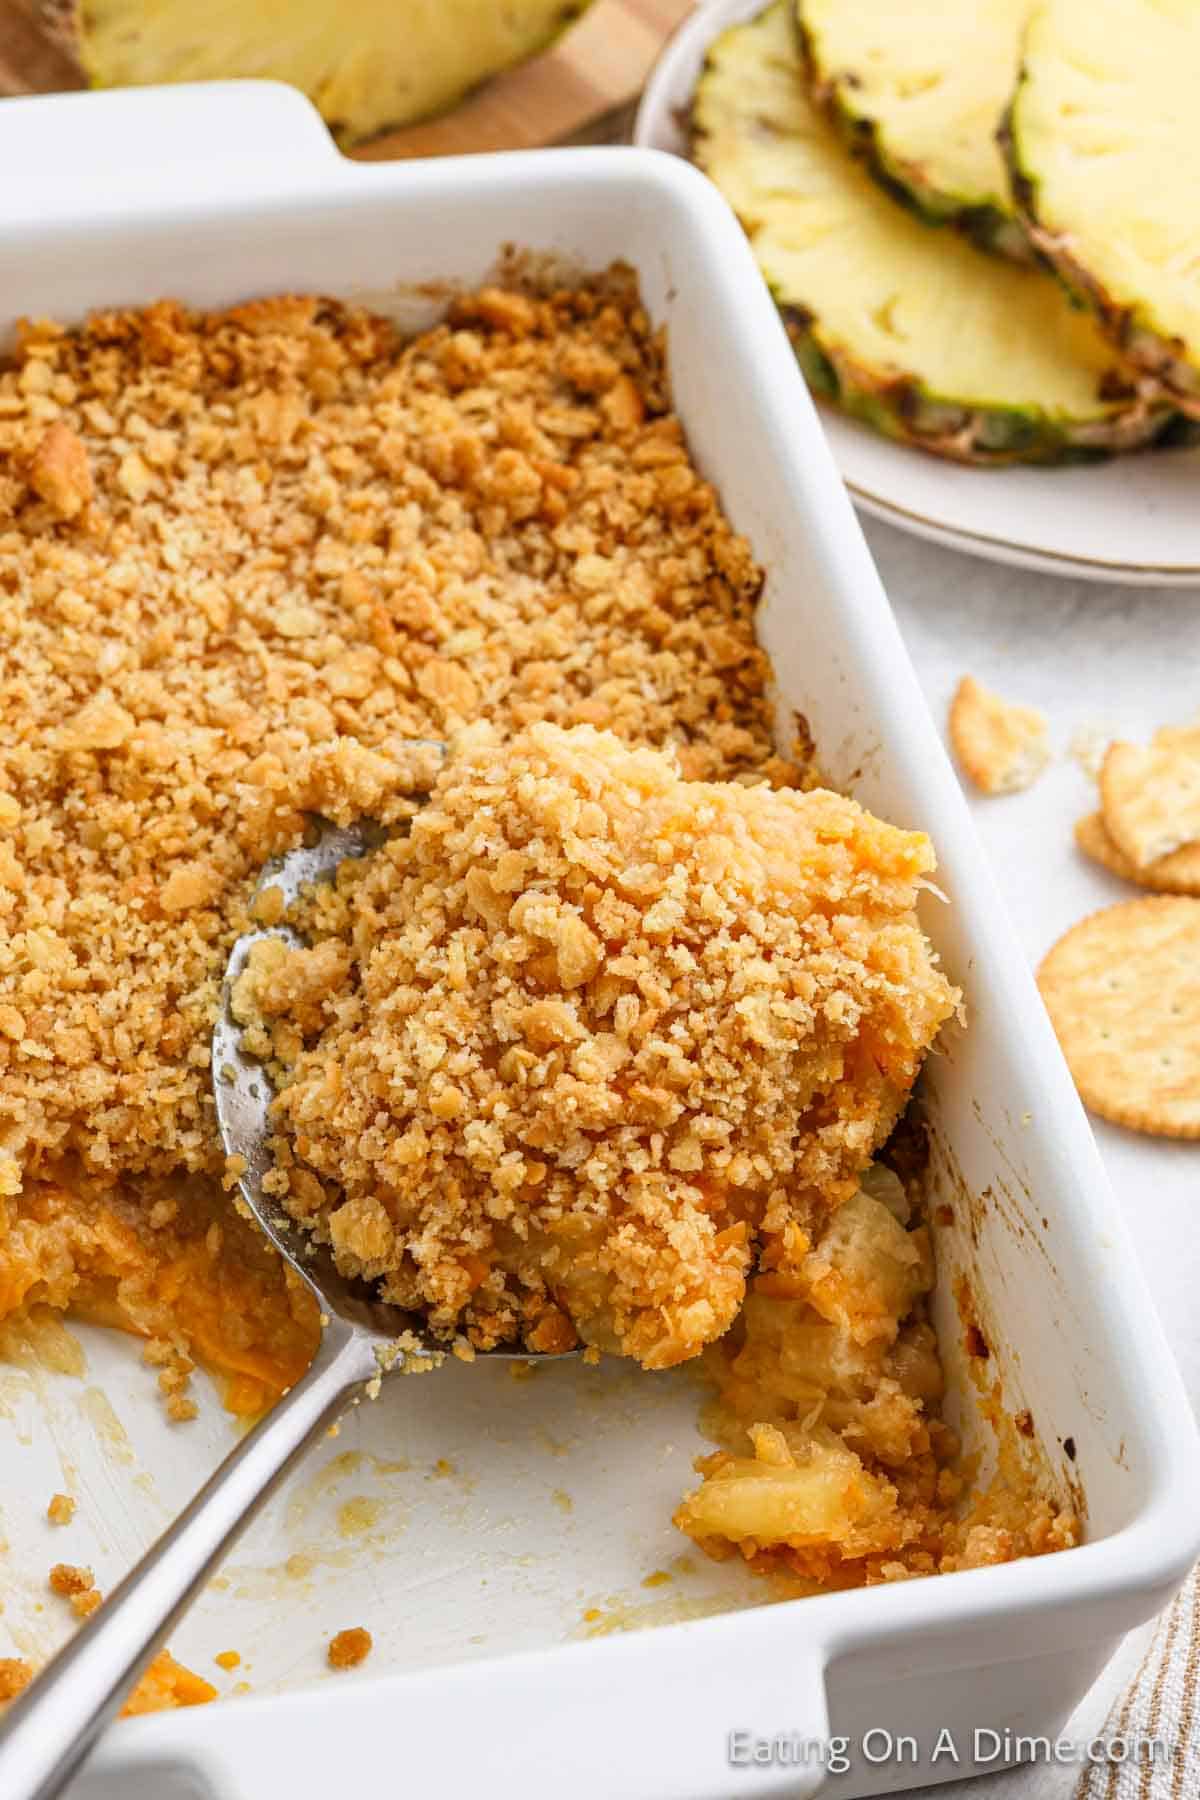 A white baking dish filled with a golden-brown Pineapple Casserole topped with crumbly cracker crust. A serving spoon is lifting a portion, displaying the mixture of crushed pineapple and crunchy topping. A plate with pineapple slices is in the background.